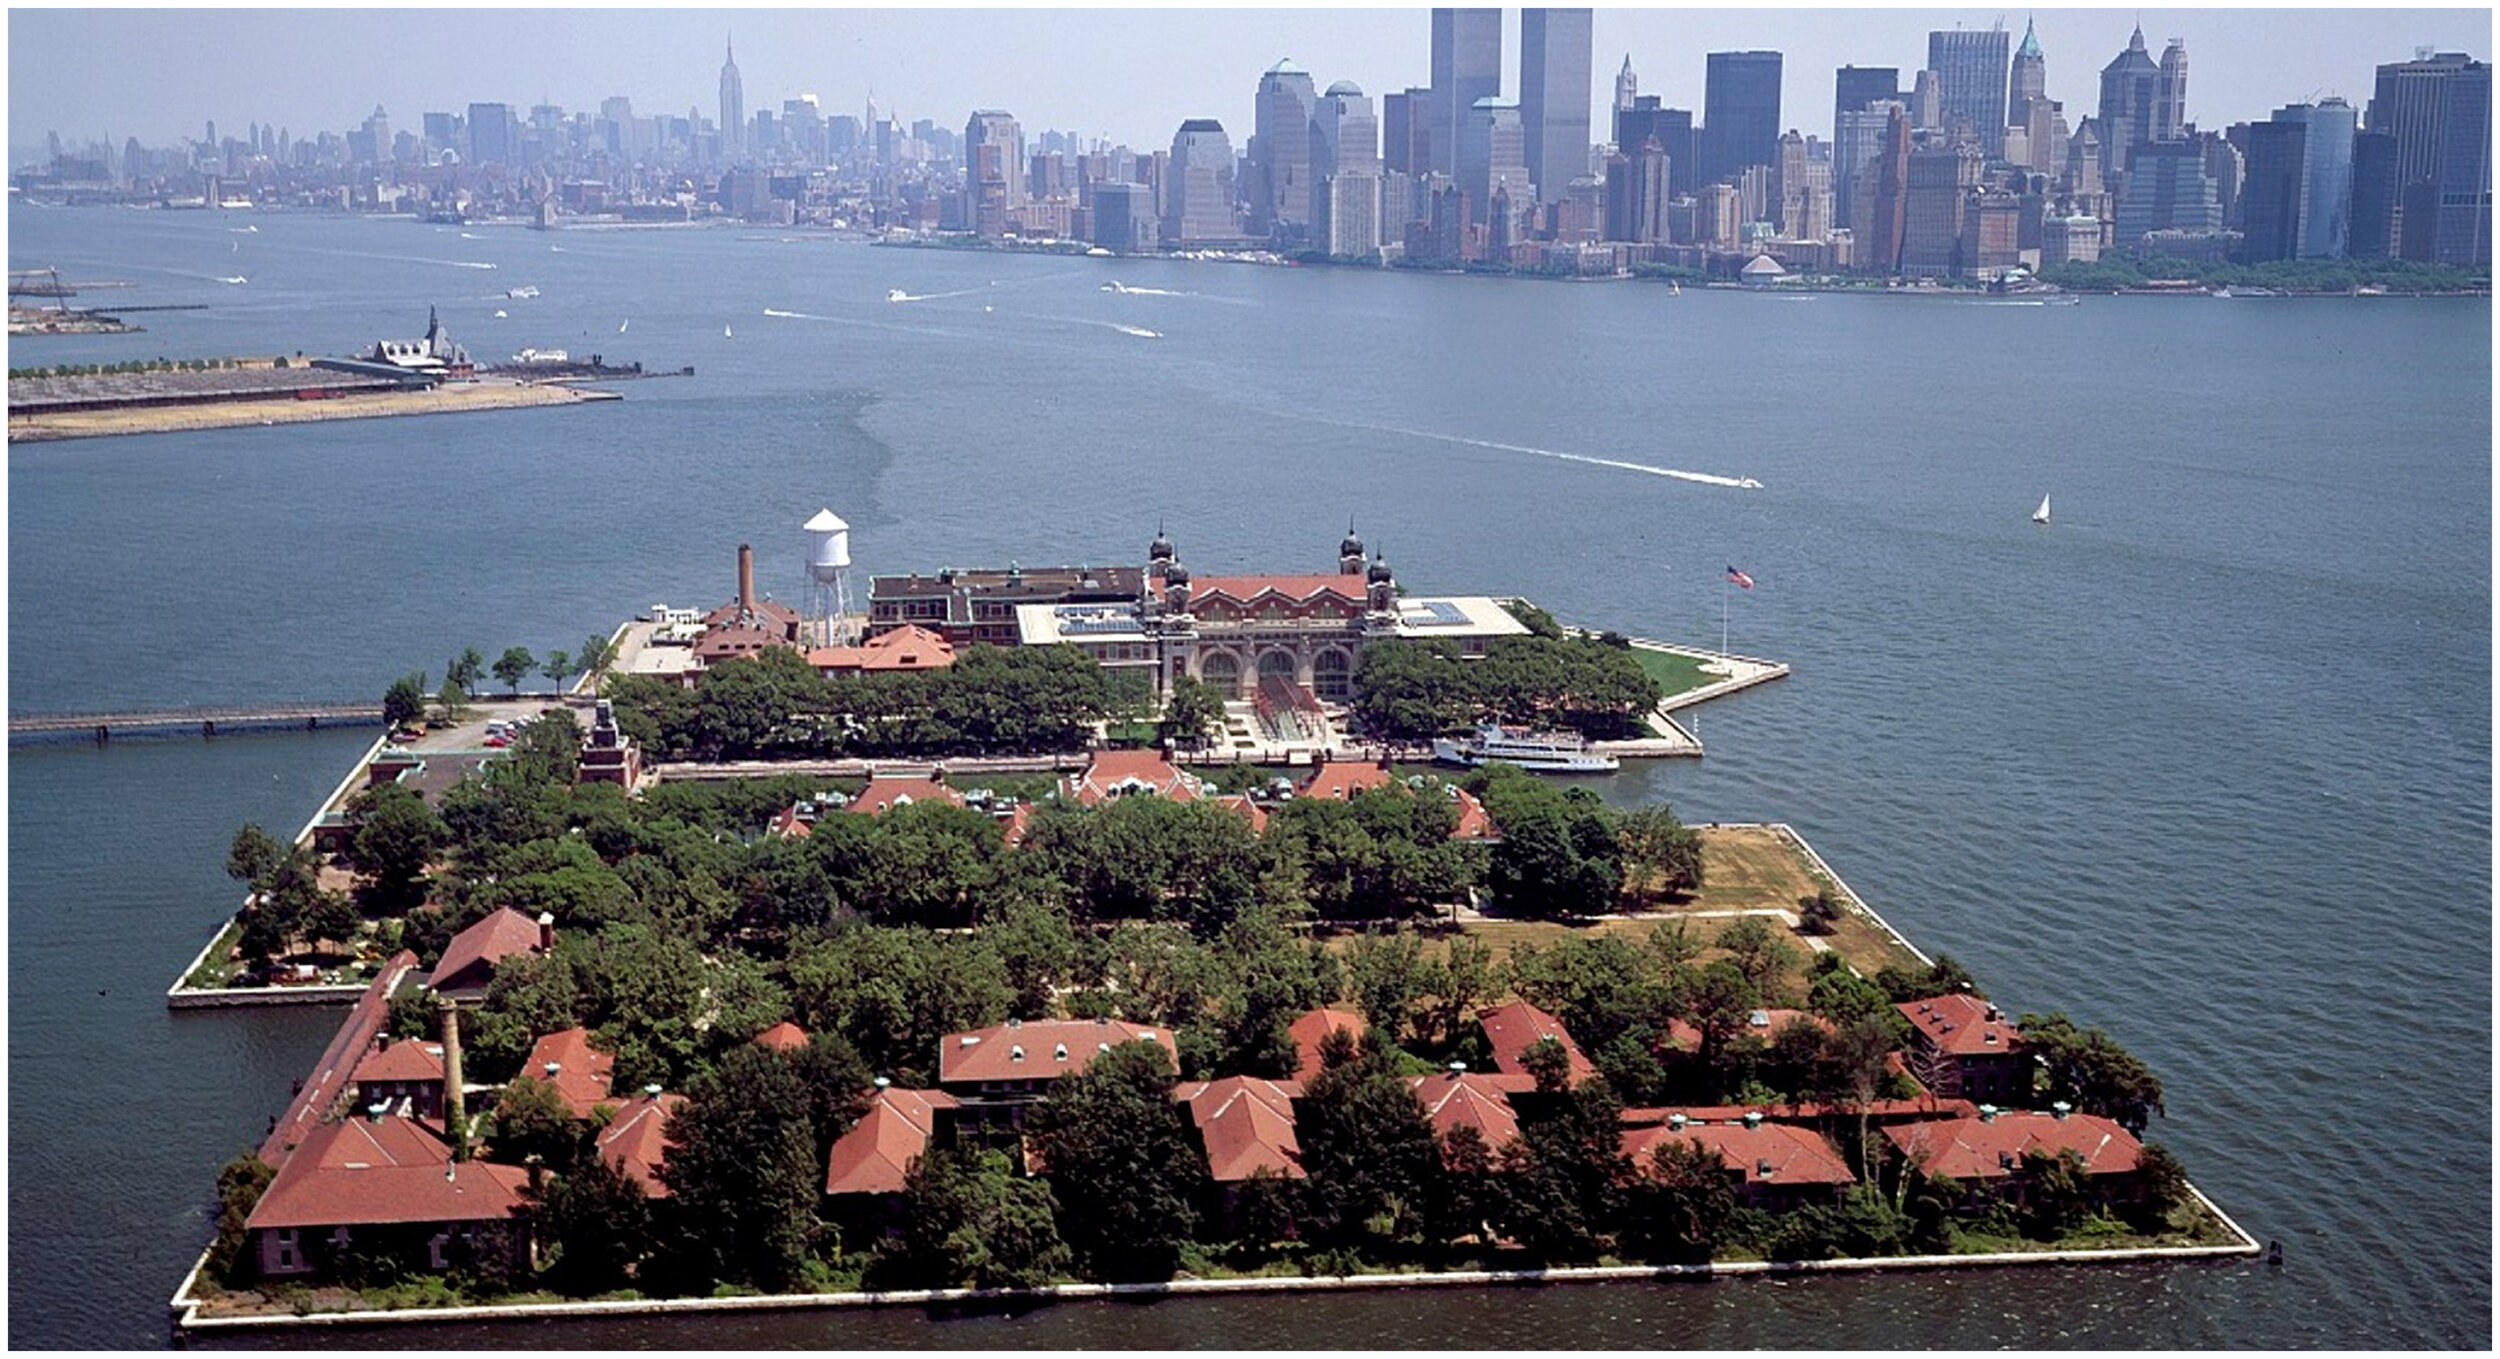 Image: Ellis Island, New York, Circa 1980-2001. Courtesy of the Library of Congress, LC-HS503- 2916